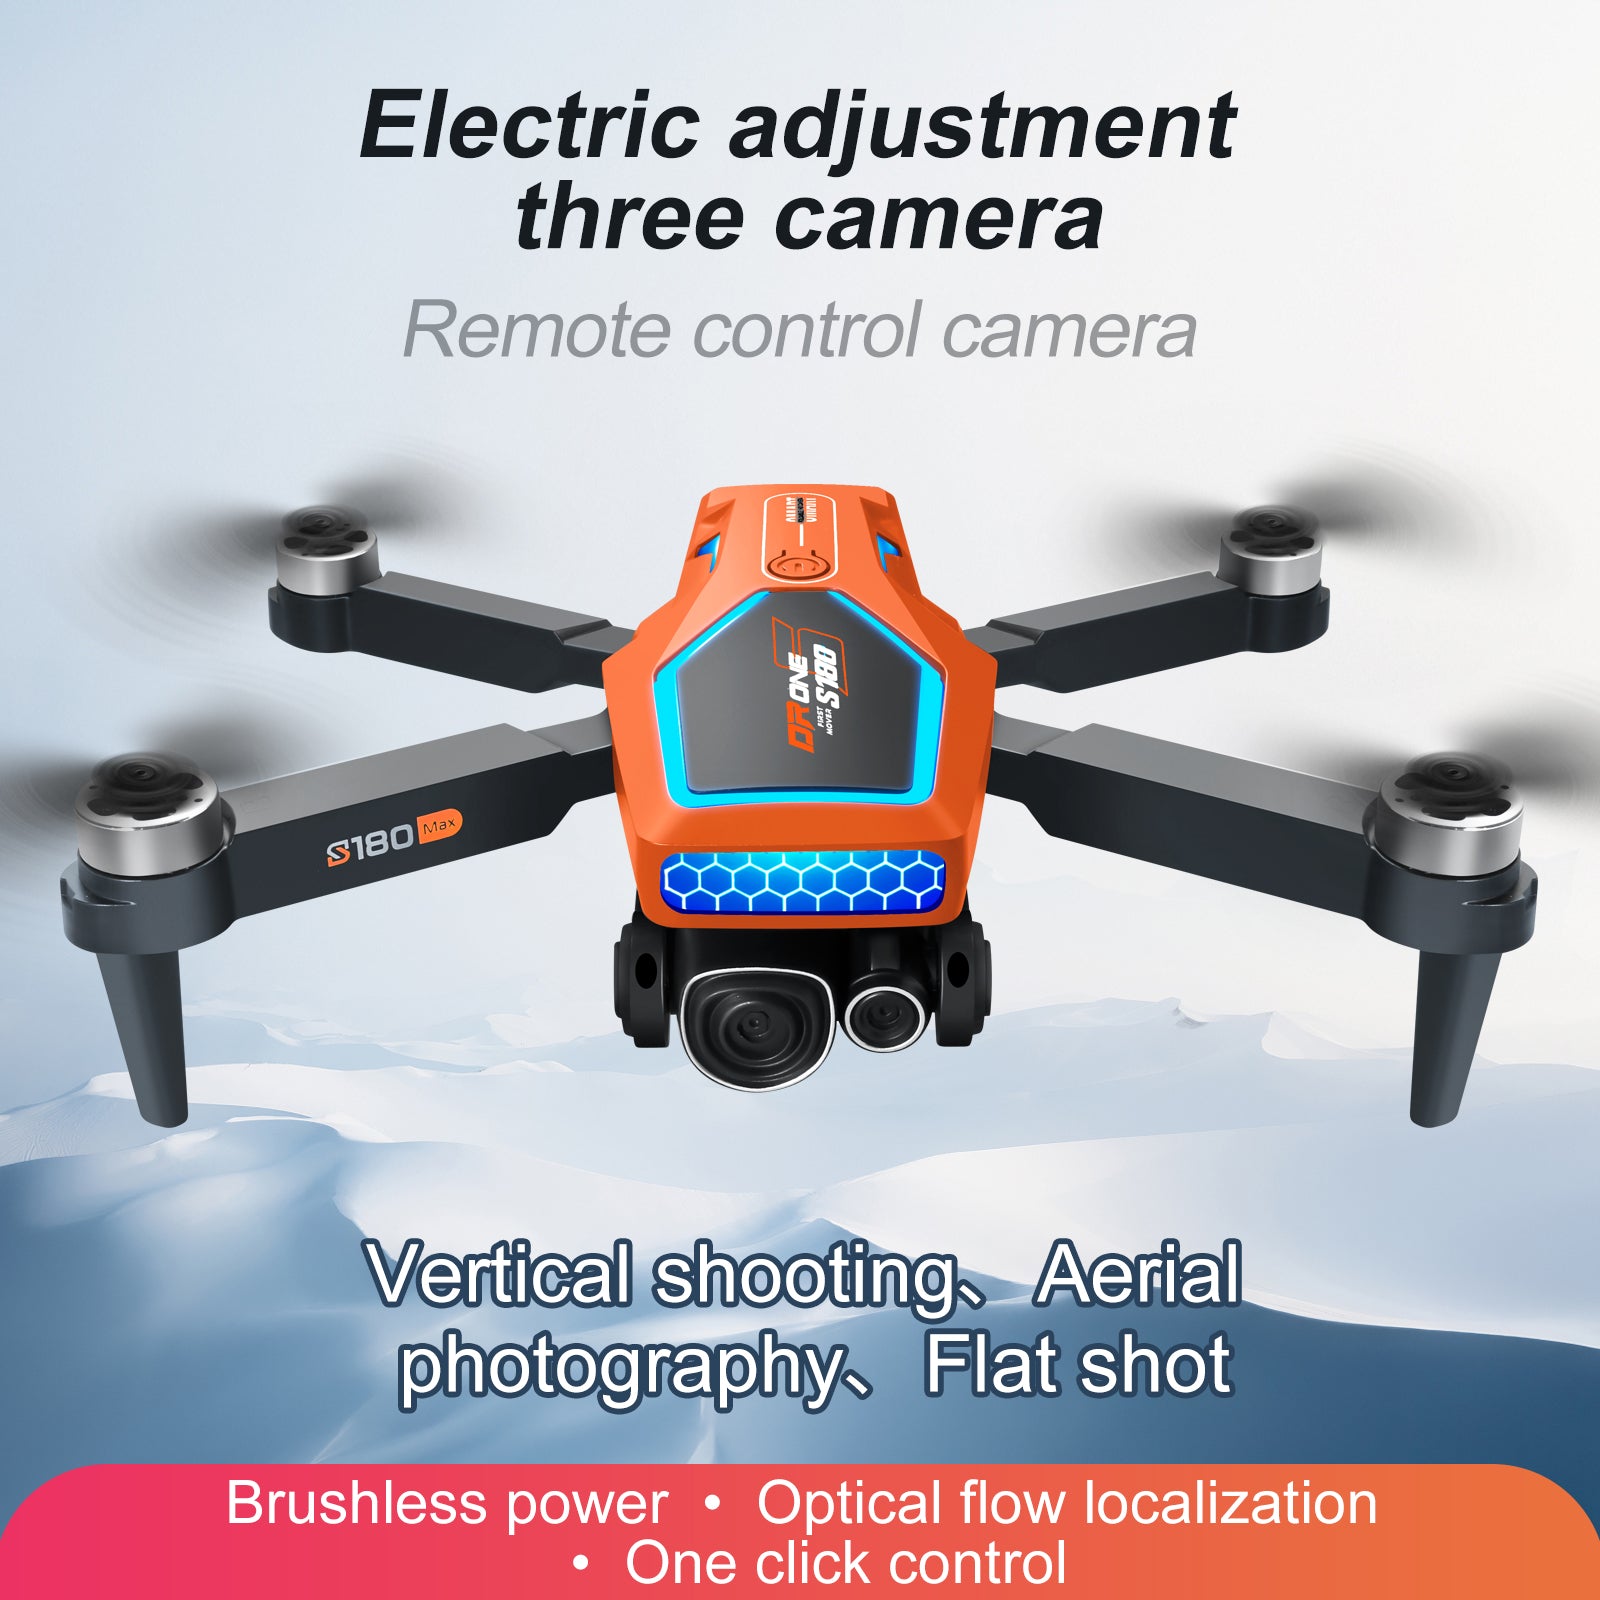 S180 Drone, High-tech drone with adjustable settings, multiple cameras, remote control, and advanced features.